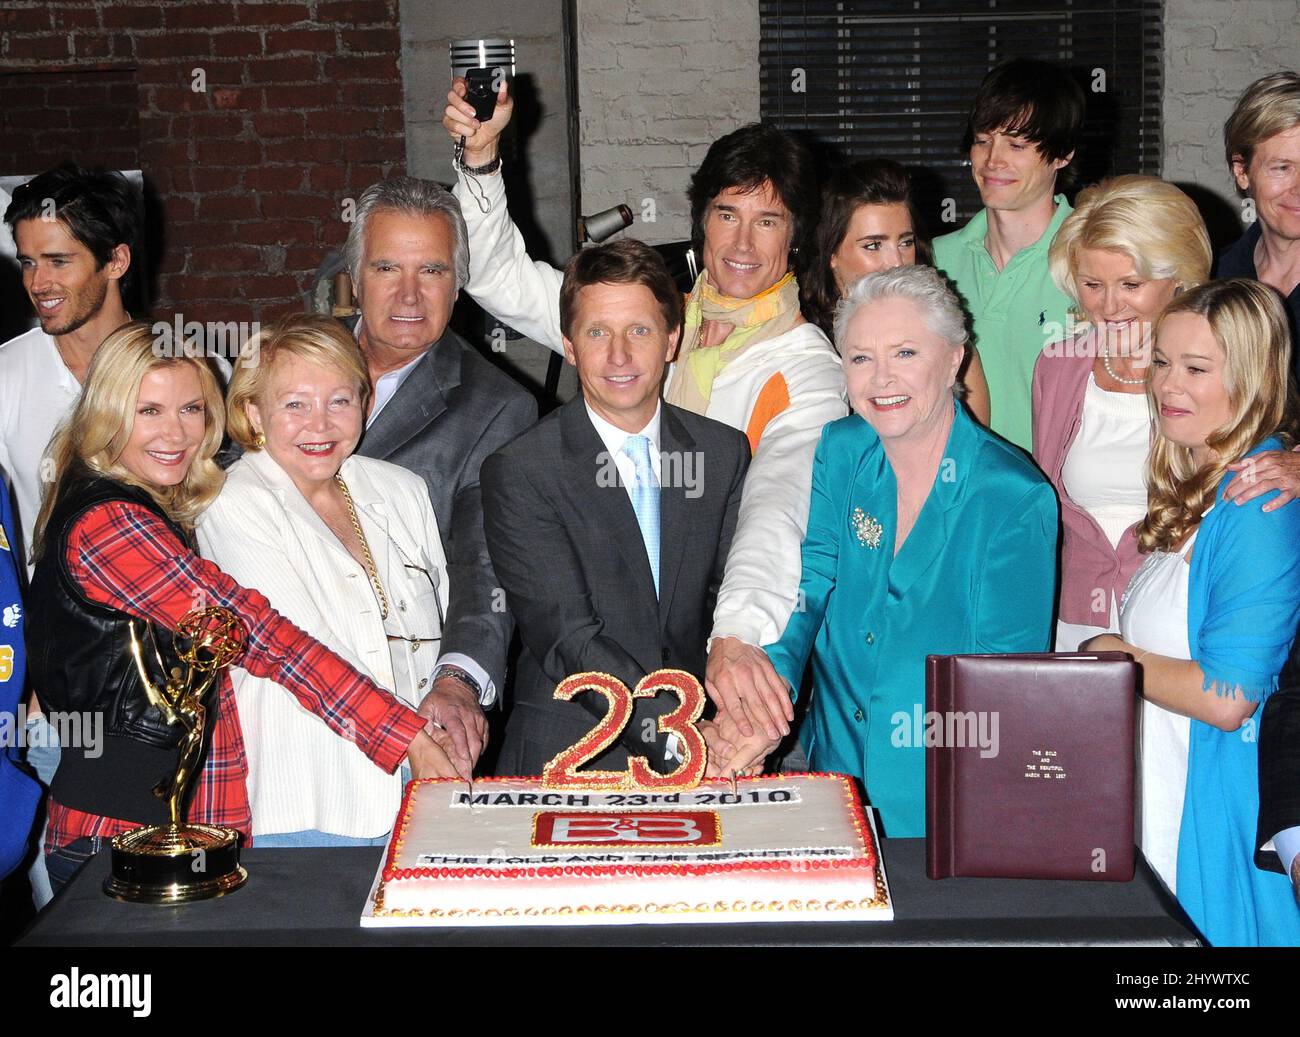 Brandon Beemer, Katherine Kelly Lang, Bradley Bell, John McCook, Ronn Moss, Lee Bell, Susan Flannery, Zack Conroy, Alley Mills and Jennifer Gareis during 'The Bold and the Beautiful' 23rd anniversary celebration held on the set at CBS Studios, California Stock Photo